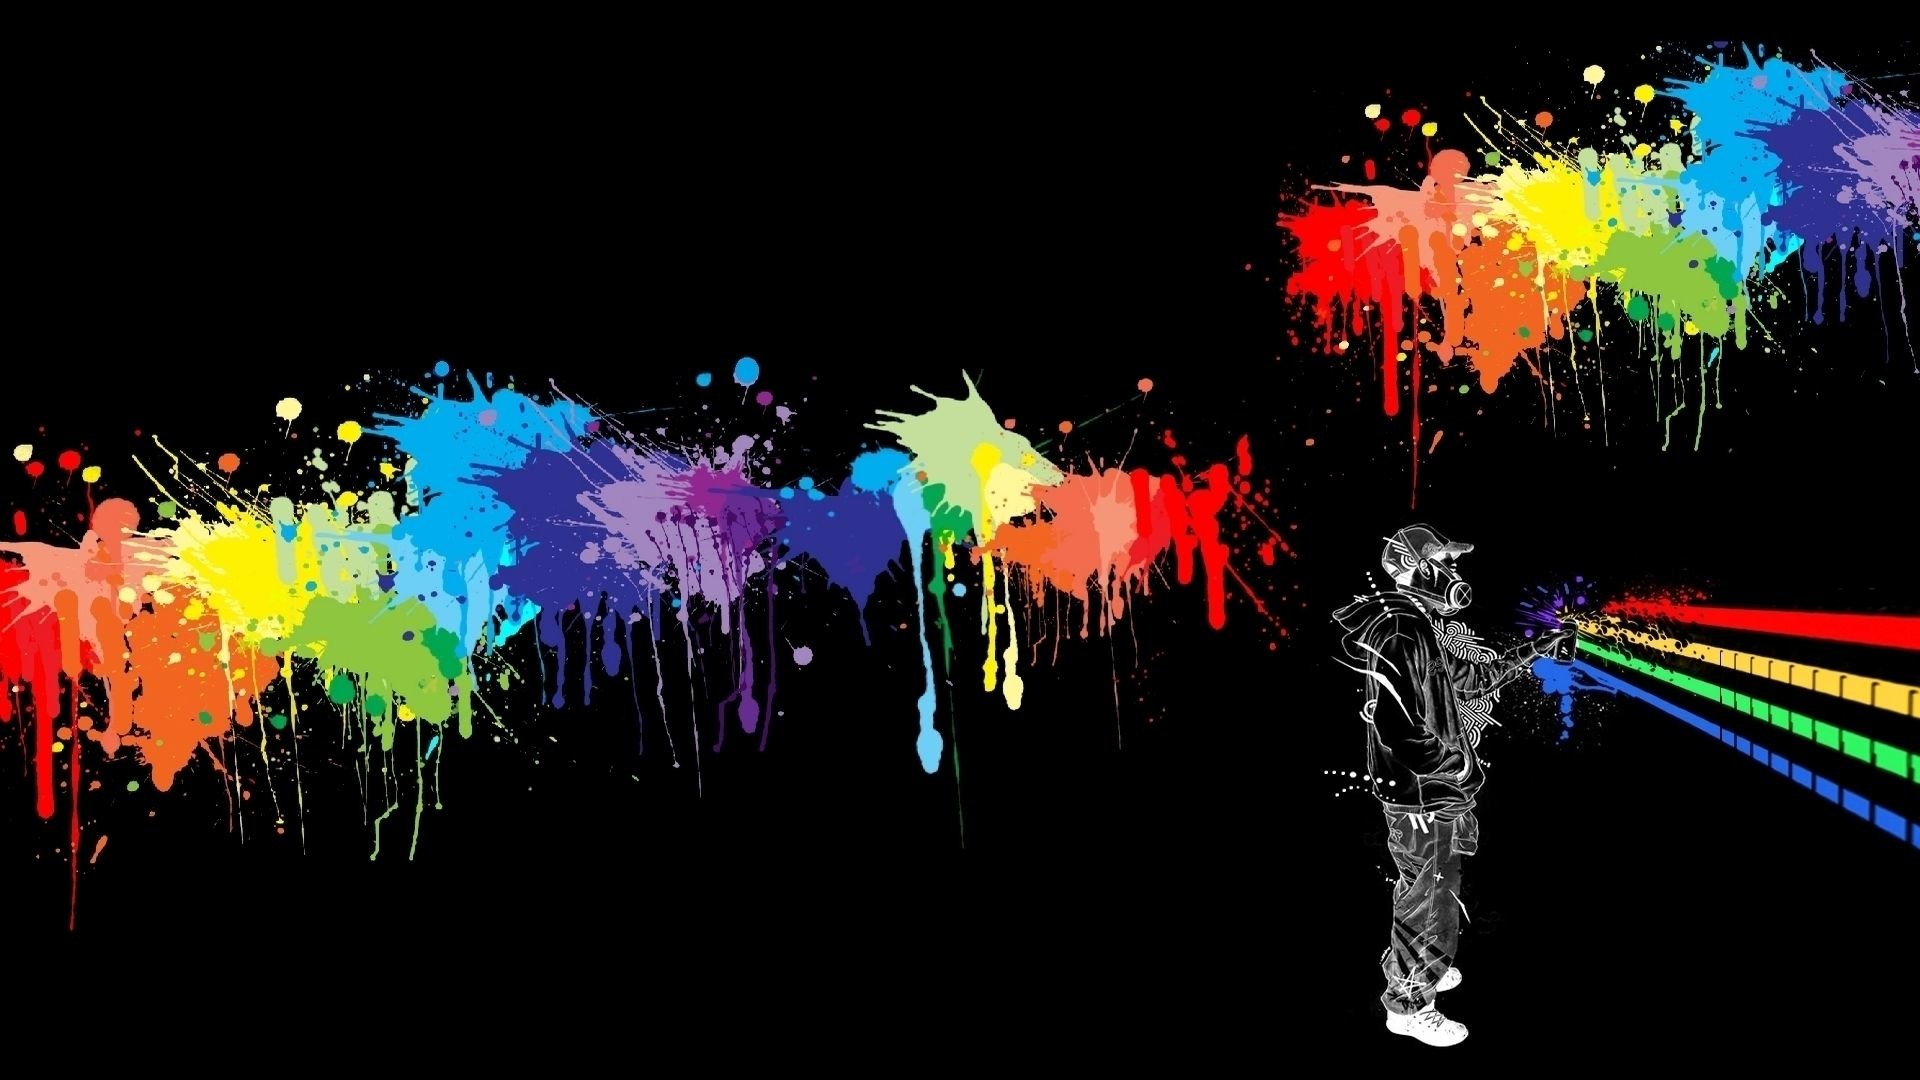 1920x1080 Abstract cool graffiti wallpaper with splach paint color street art  background hd